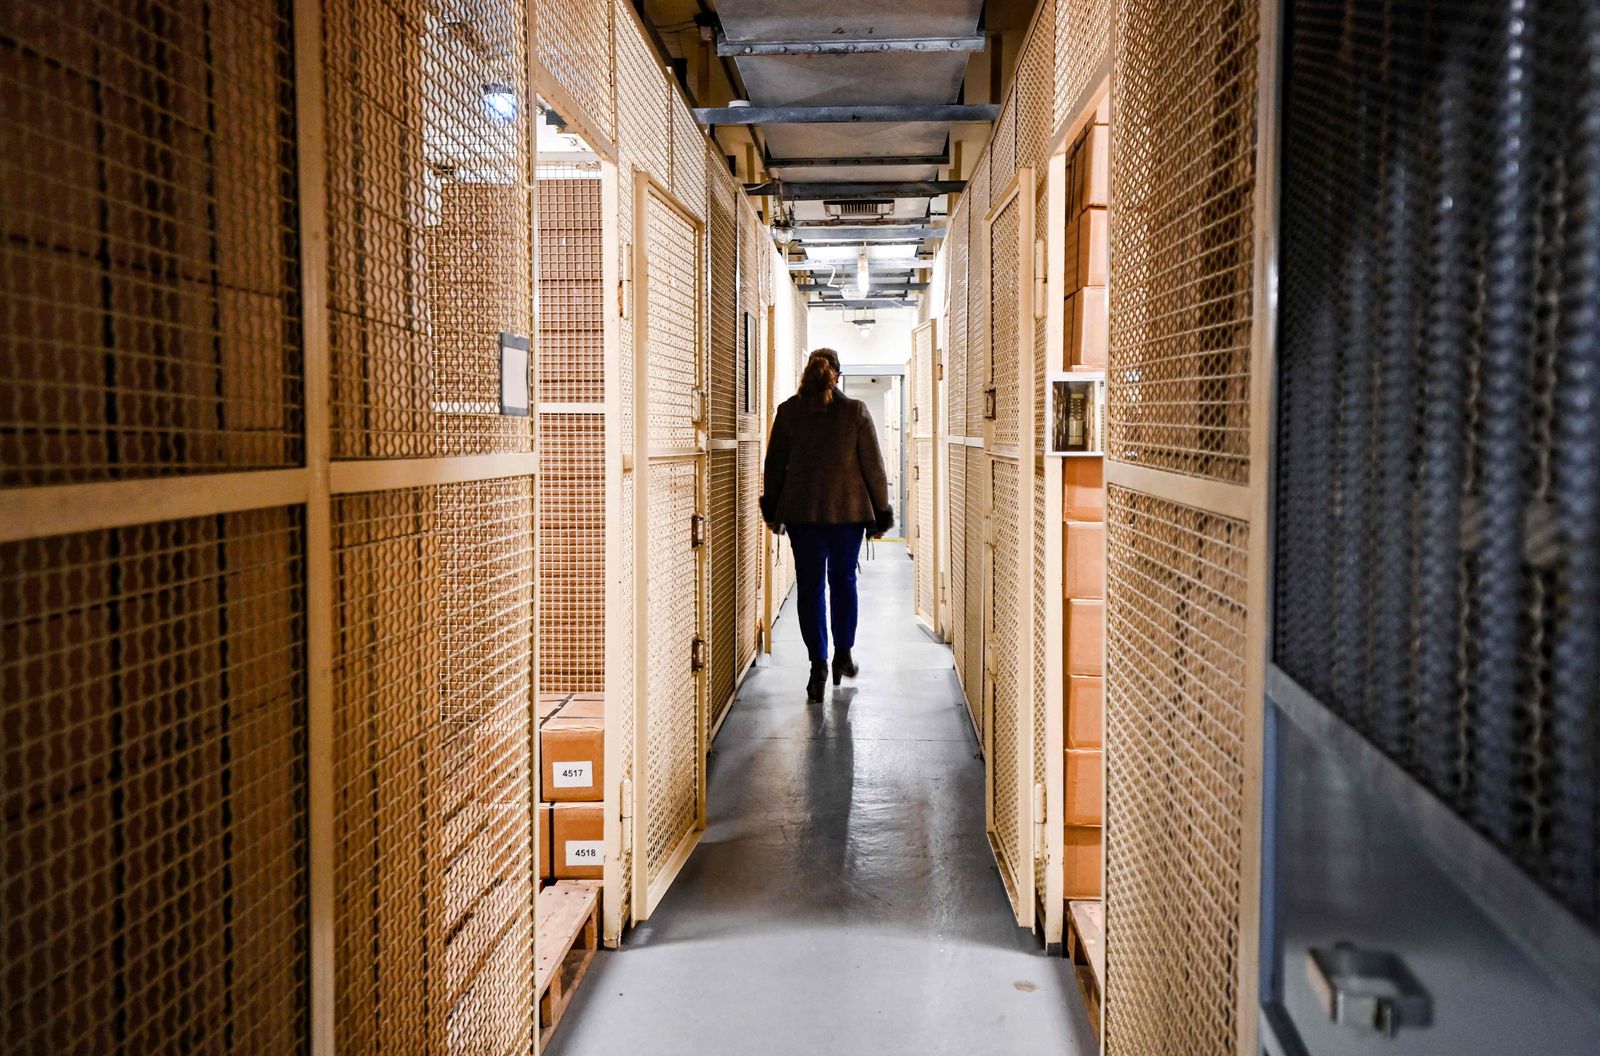 Petra Reuter, owner of the Bundesbank Bunker Museum, walks past storage rooms for the substitute currency in the former vault of the bunker museum in Cochem, western Germany on February 8, 2022. - The Bundesbank Bunker was a bunker of the German Federal Bank in Cochem for the storage of an emergency currency. From 1964 to 1988, up to 15 billion marks were stored in the top-secret facility to protect Germany from a national economic crisis in the event of hyperinflation caused by the Cold War. (Photo by Ina FASSBENDER / AFP) - AFP